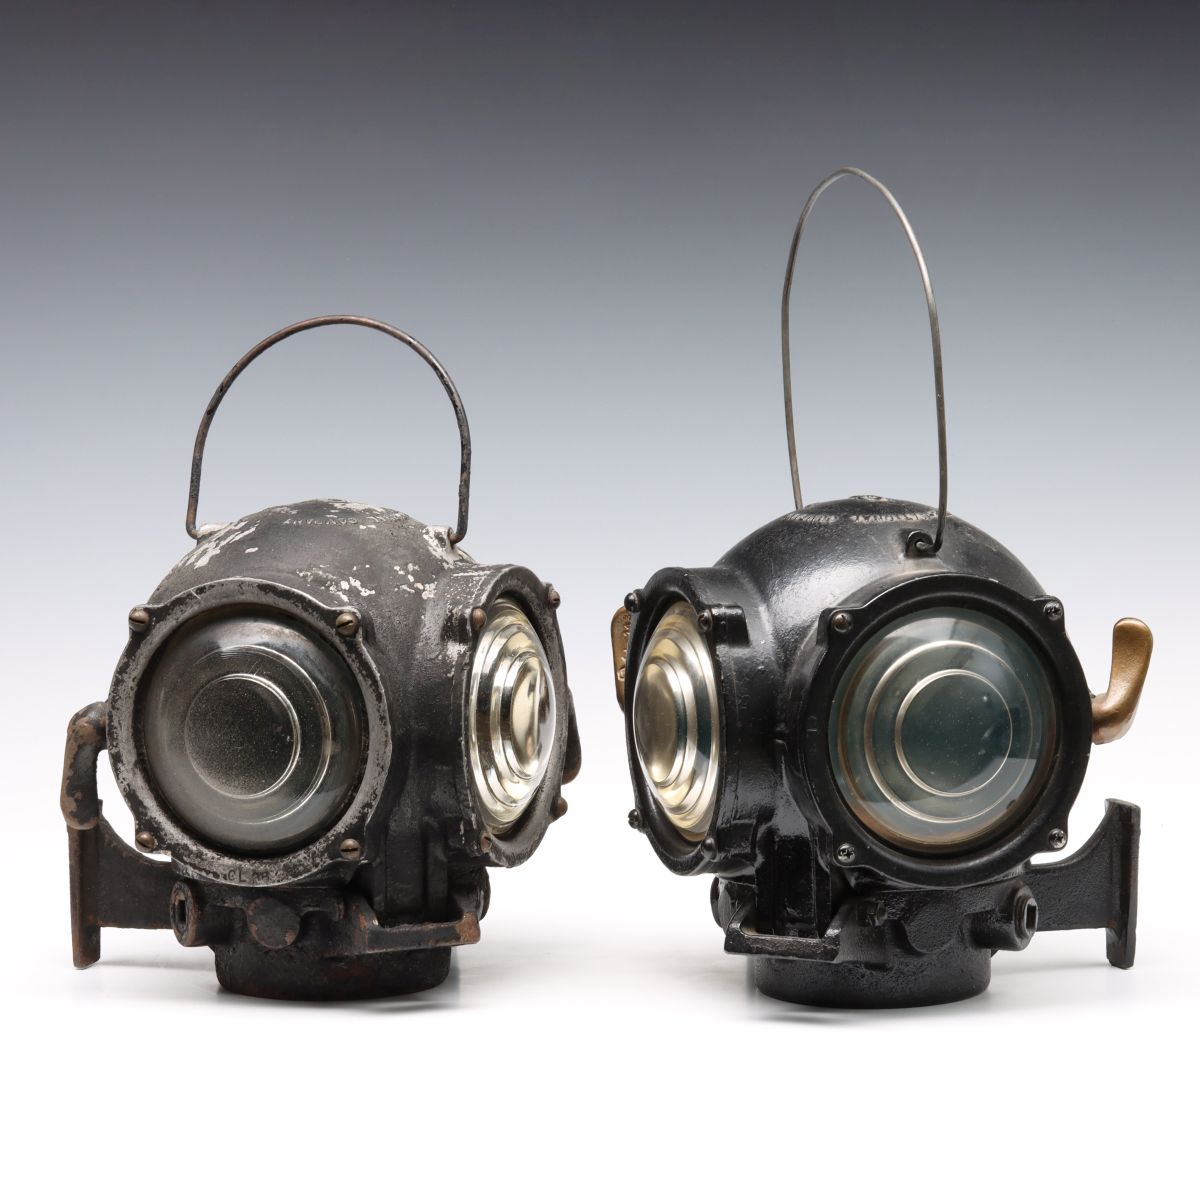 TWO UNMATCHED RAILROAD ENGINE CLASSIFICATION LAMPS